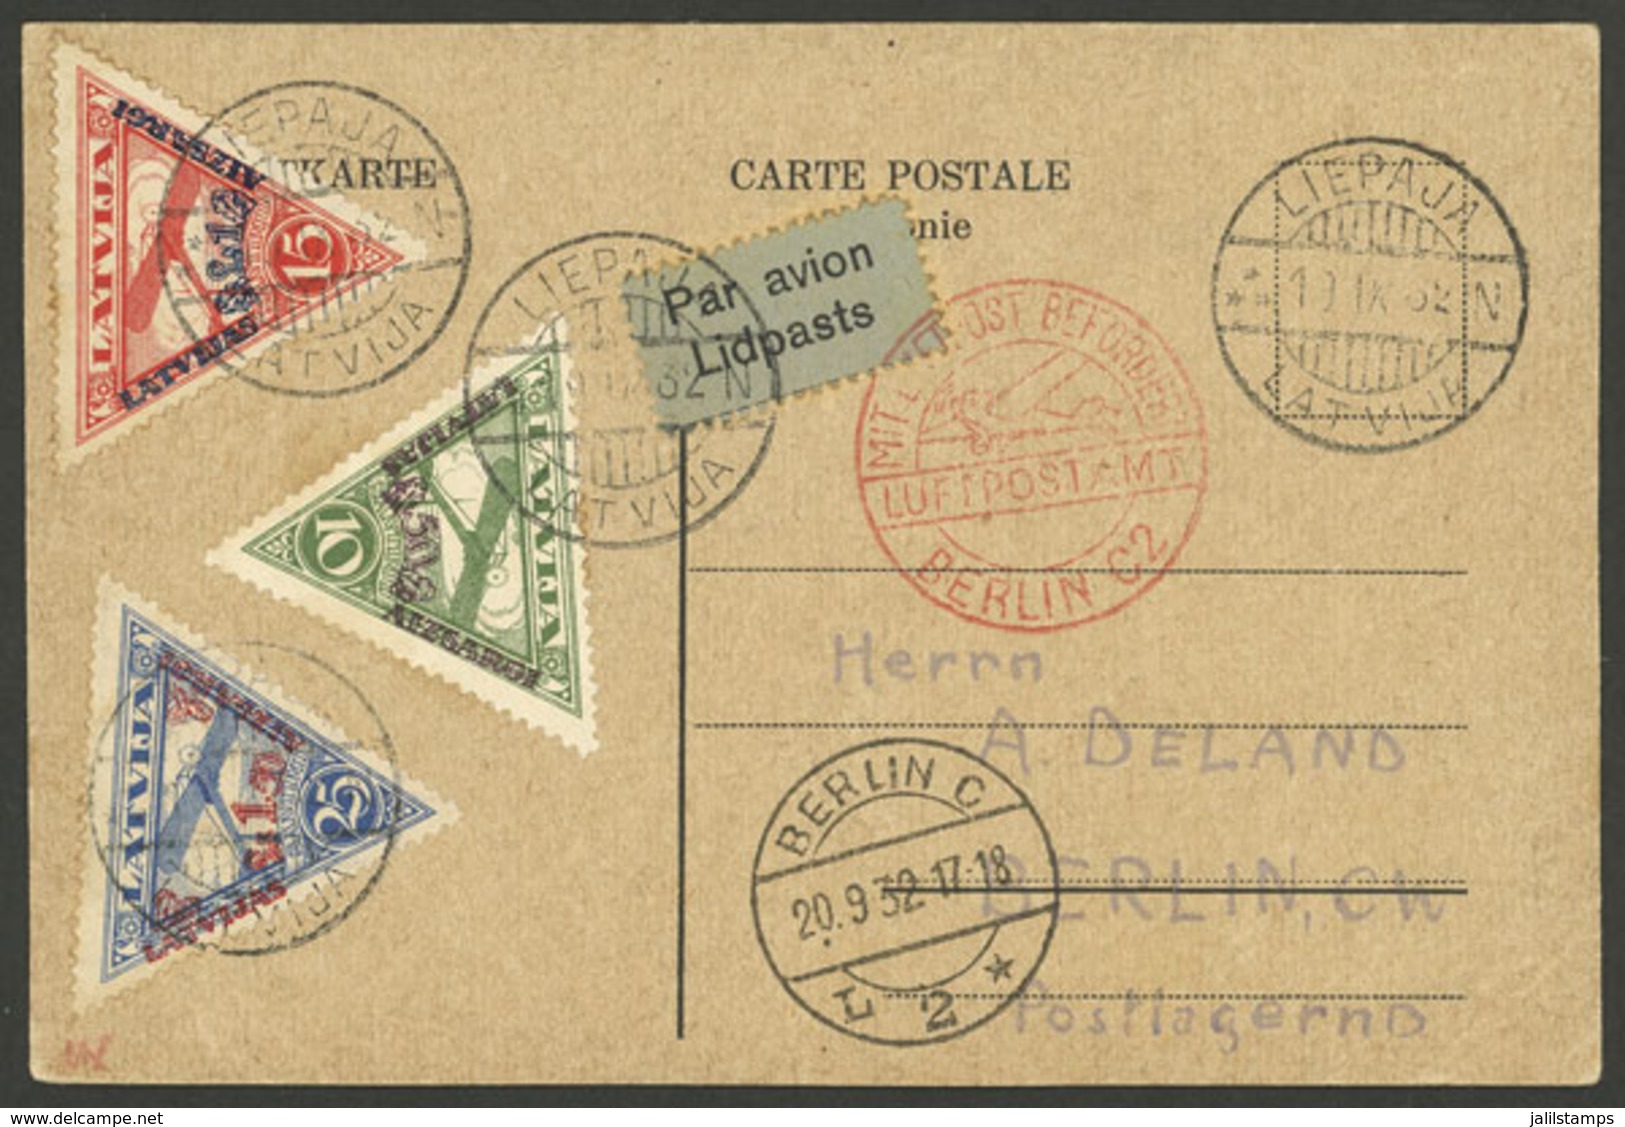 LATVIA: 19/SE/1932 Liepaja - Berlin, Card Franked By Sc.CB3/CB5, Sent By Airmail By DLH, With Berlin Arrival Mark Of 20/ - Lettonie